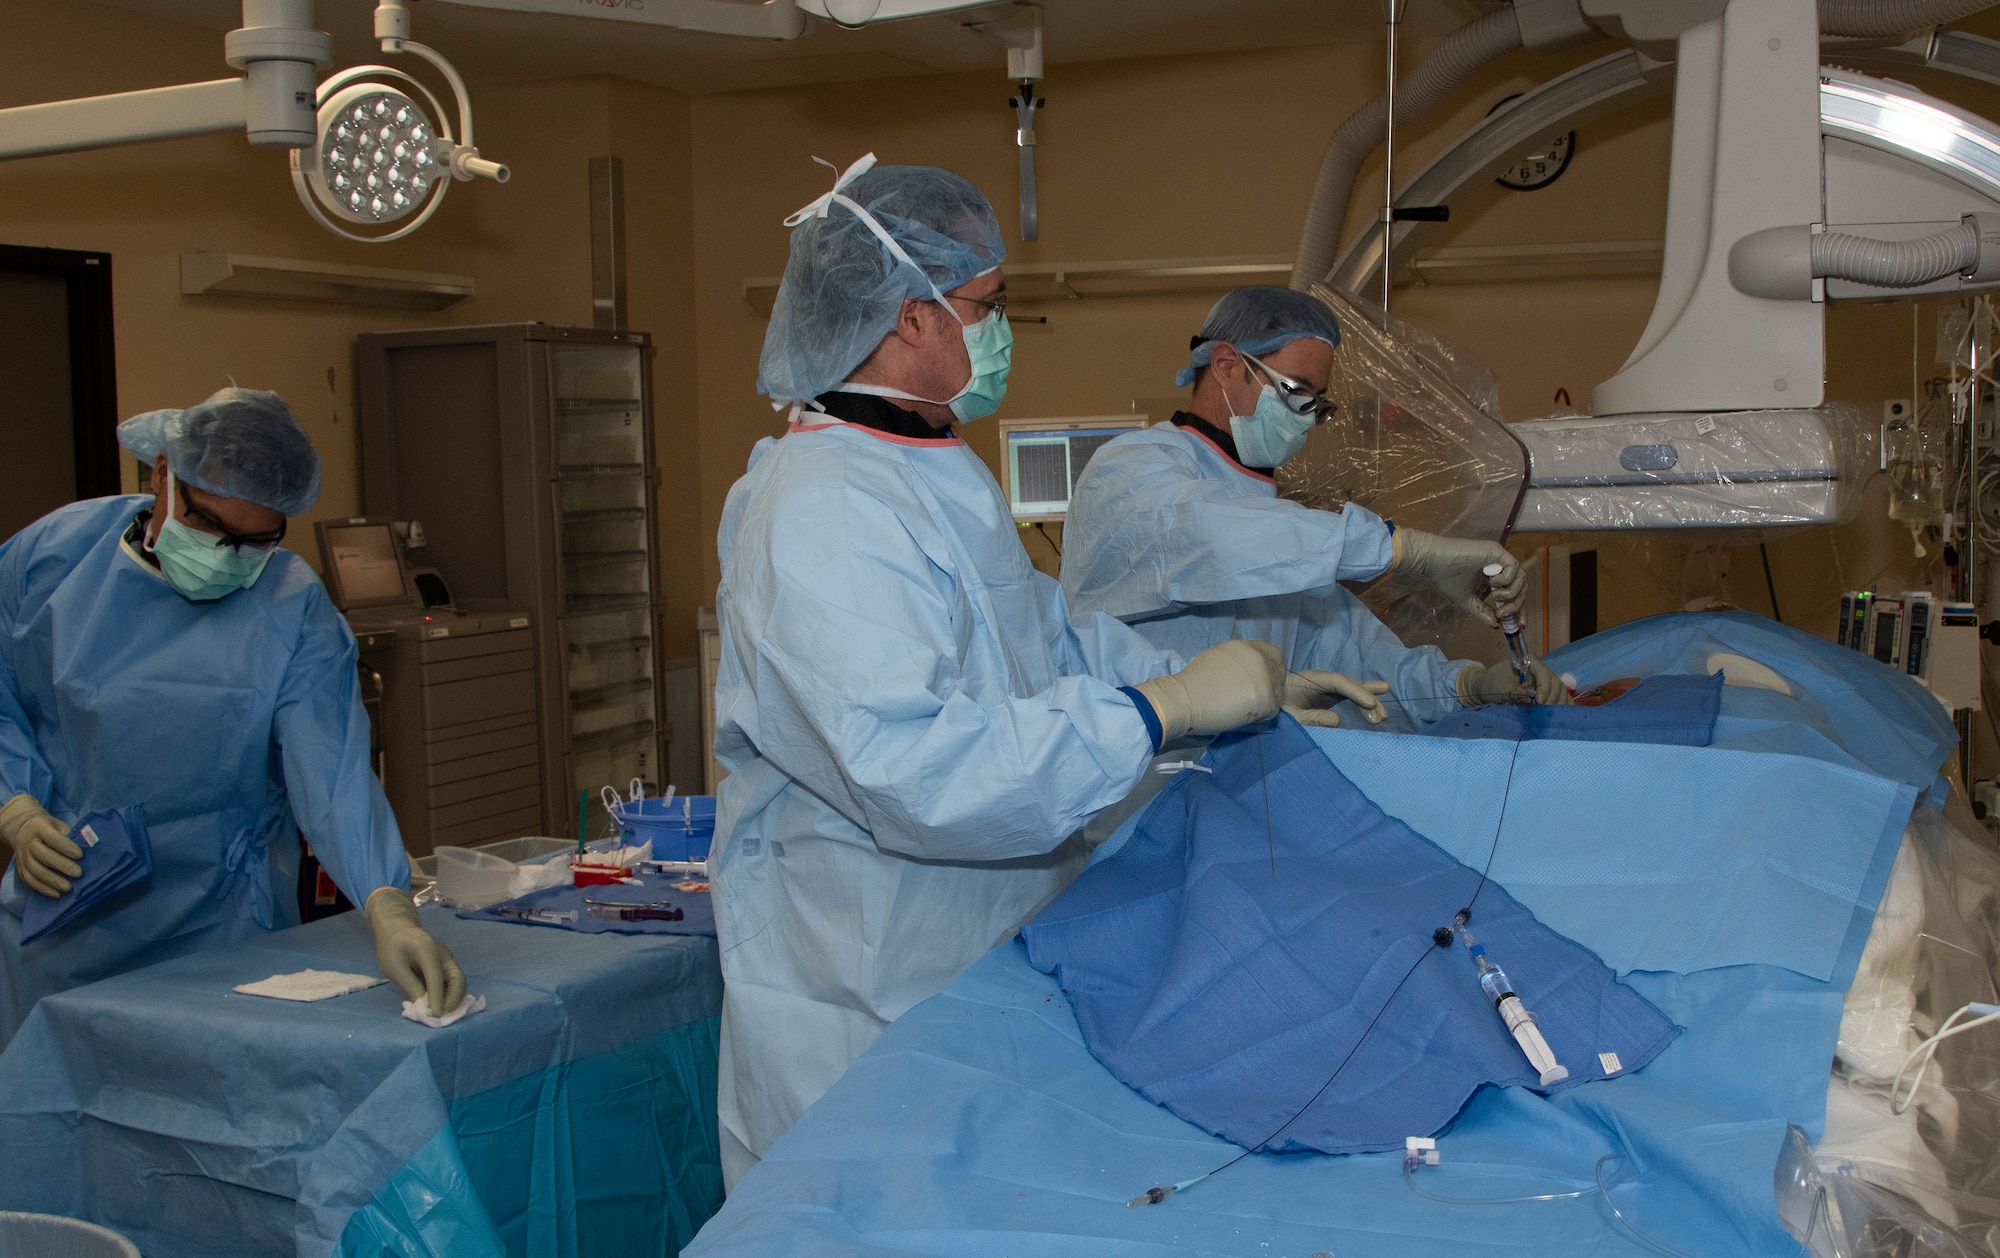 U.S. Air Force Lt. Col. (Dr.) David Gover and Maj. (Dr.) Jason Hoskins, 60th Medical Group interventional radiologists at David Grant USAF Medical Center conduct a Yttrium-90 radioembolization procedure for a patient with liver cancer Sept. 7, 2018 at Travis Air Force Base, Calif. The procedure is an advanced and minimally invasive method utilized to treat cancer by delivering millions of tiny radioactive beads inside the blood vessels that feed a tumor. The high dose of targeted radiation prospectively kills the tumor while sparing normal tissue. This was the first time the treatment was performed at DGMC. (U.S. Air Force Photo by Heide Couch)